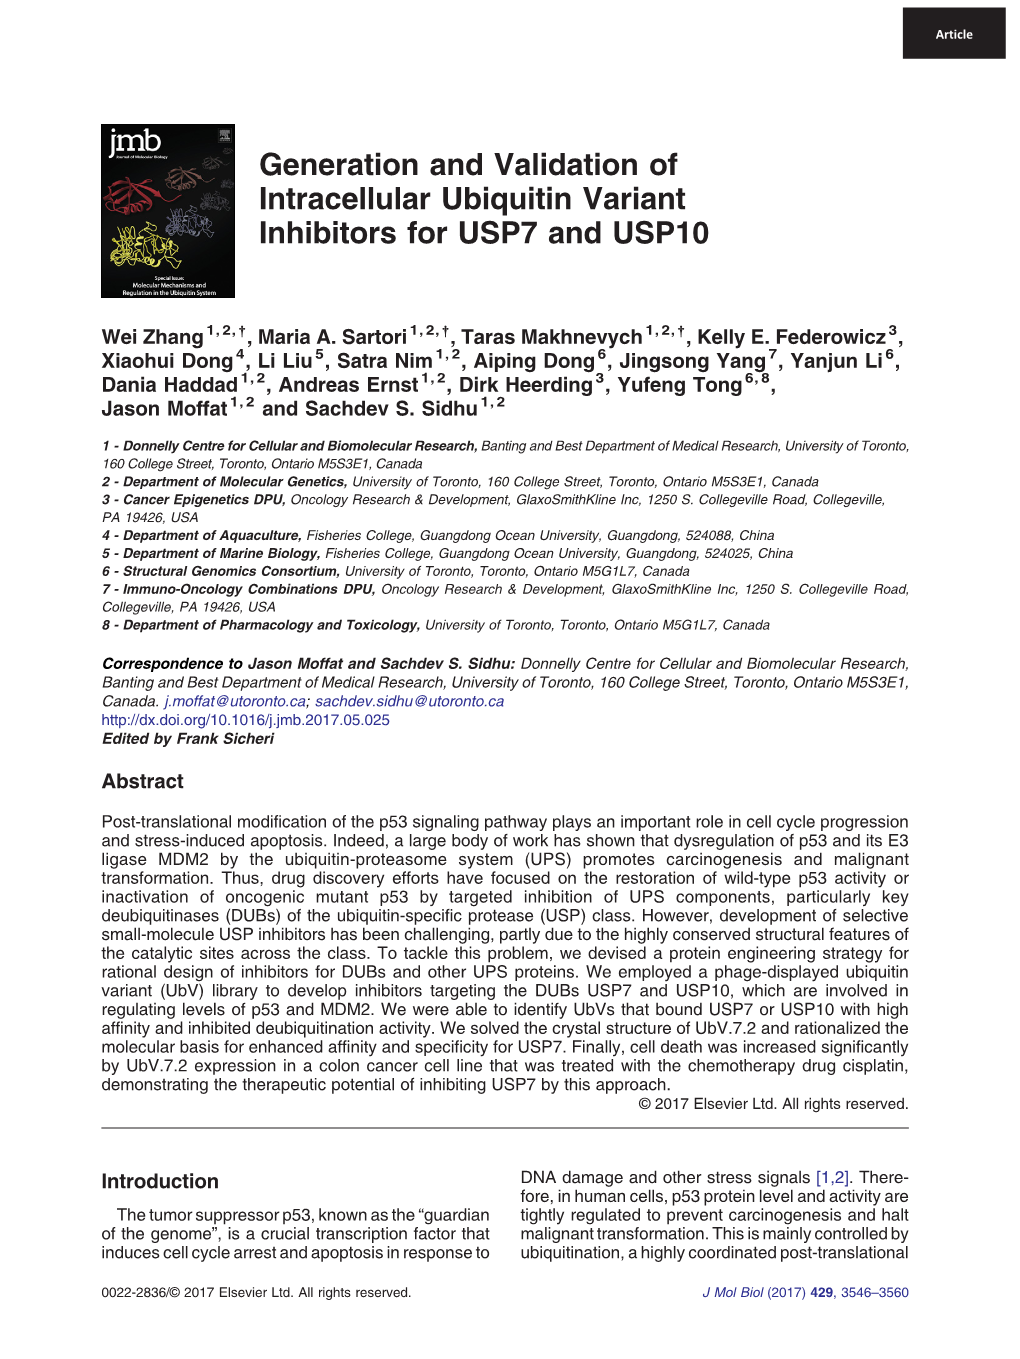 Generation and Validation of Intracellular Ubiquitin Variant Inhibitors for USP7 and USP10